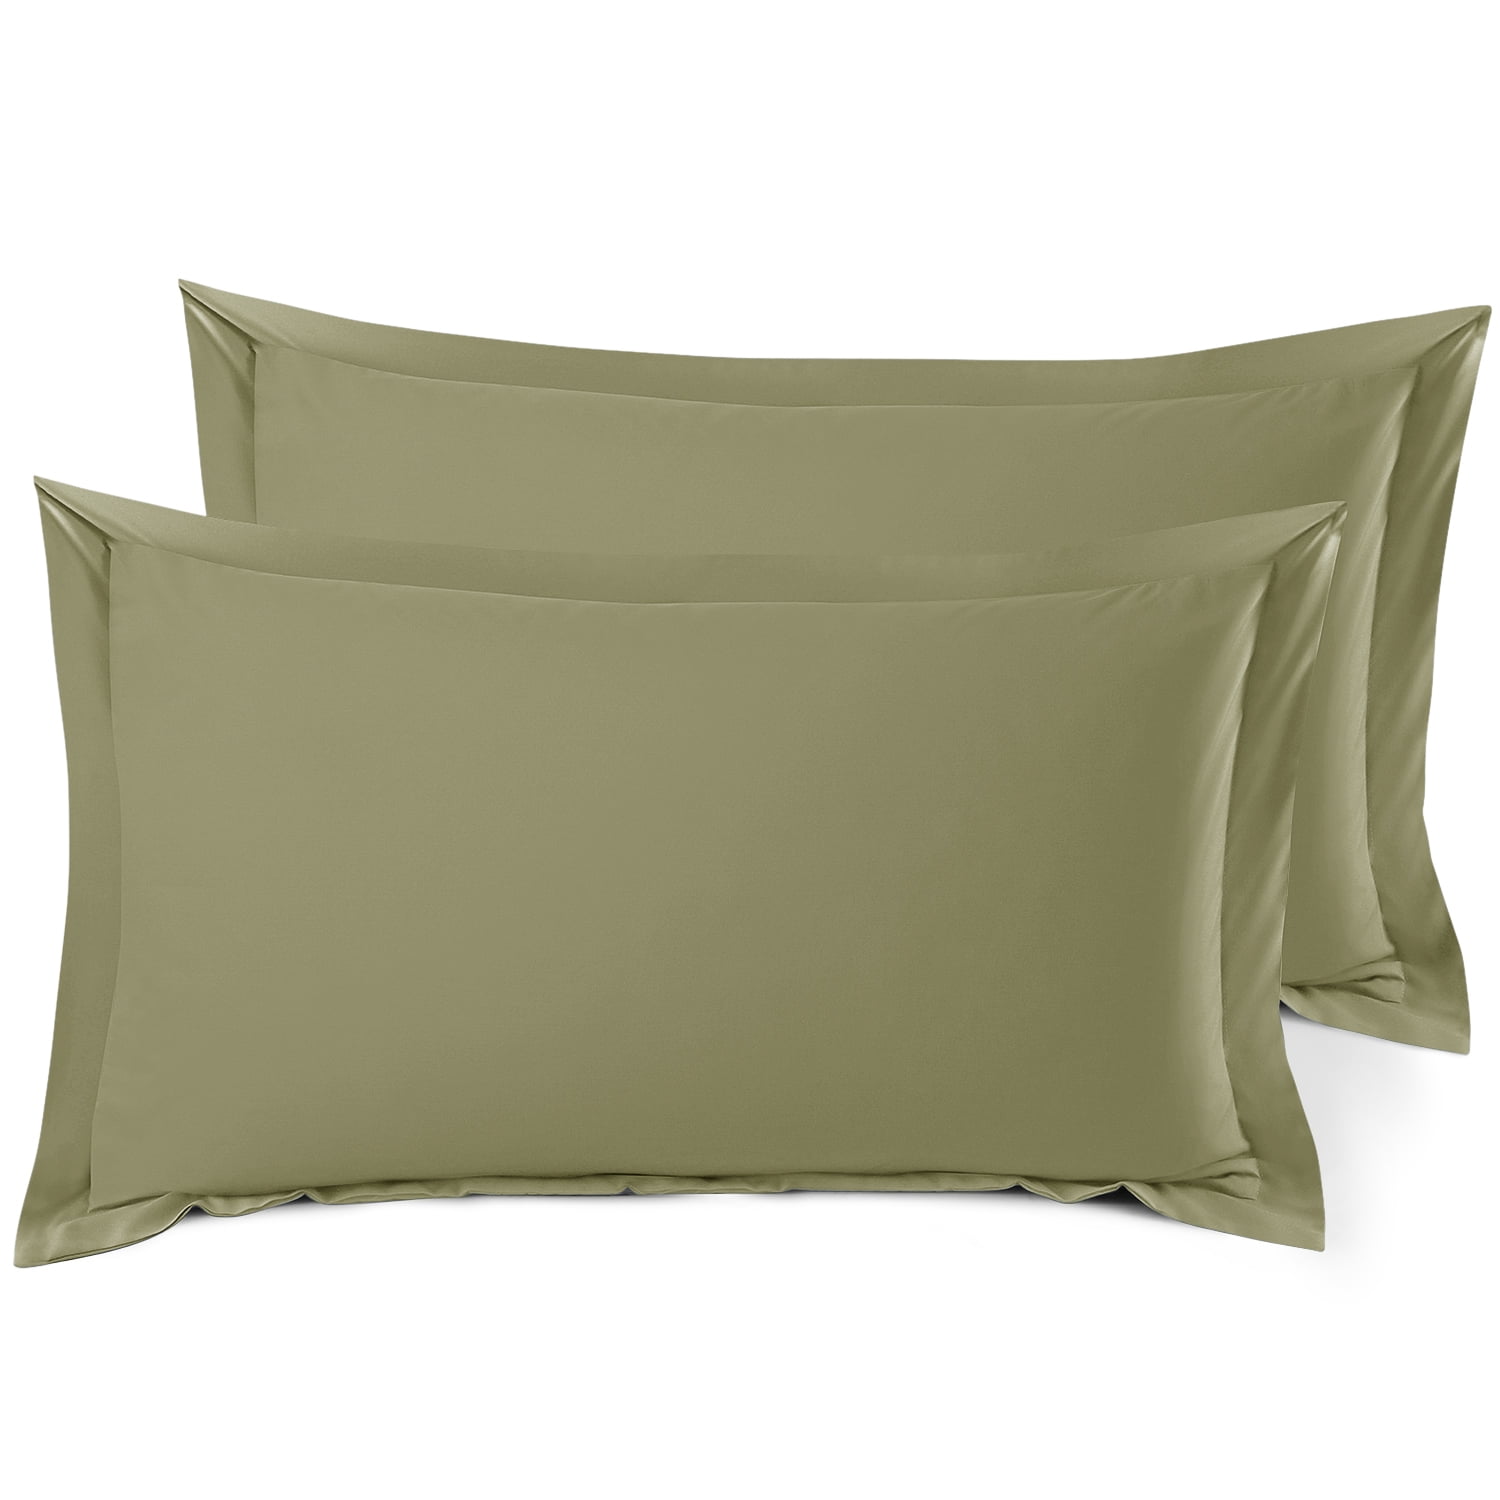 NEW  Lands End Pillowcases Soft Sateen Solid Sage Green KING Set of 2 